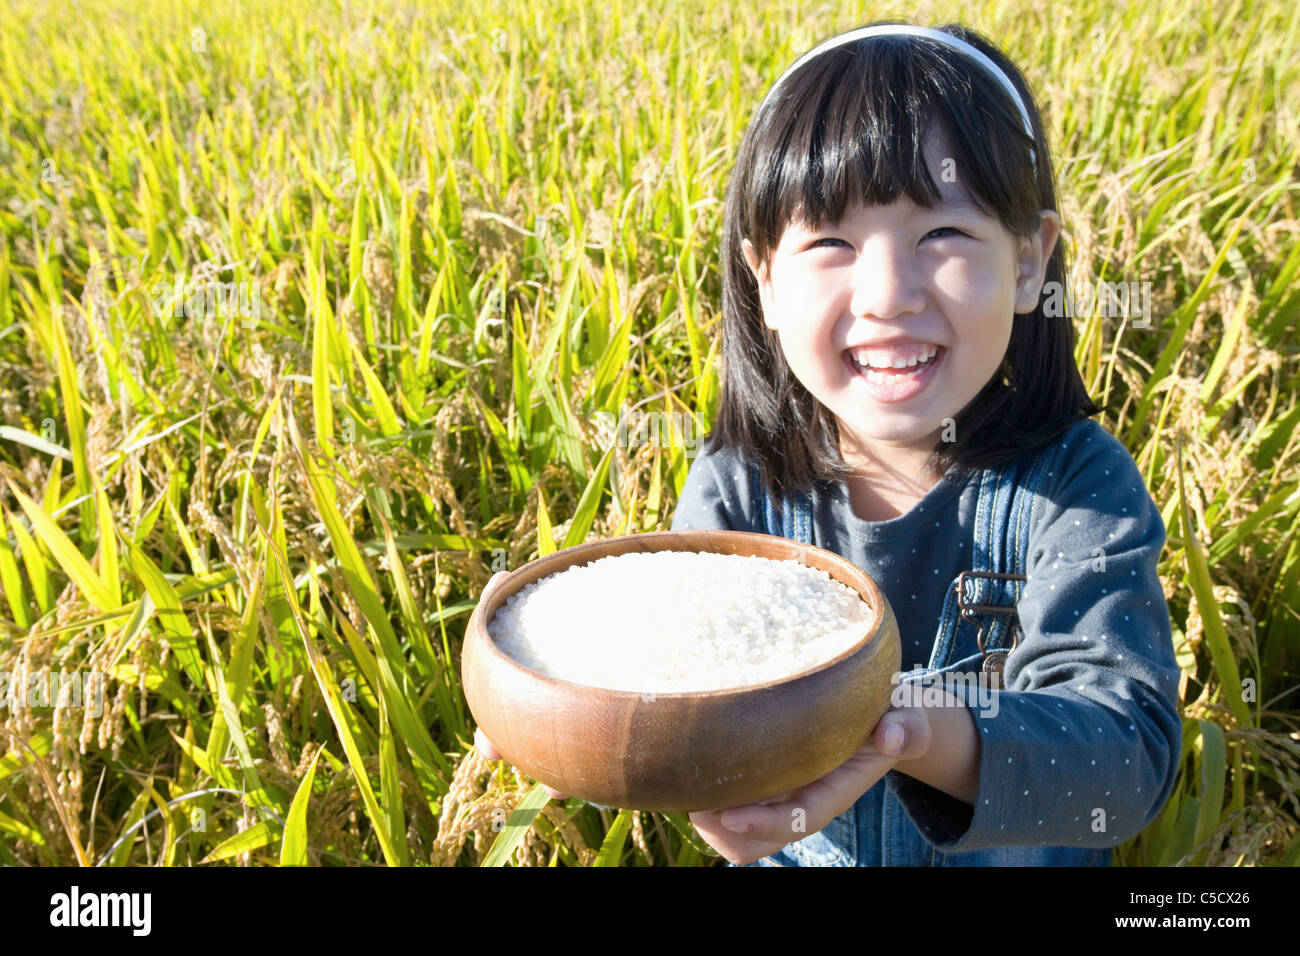 jar filled with rice in girl's hand Stock Photo